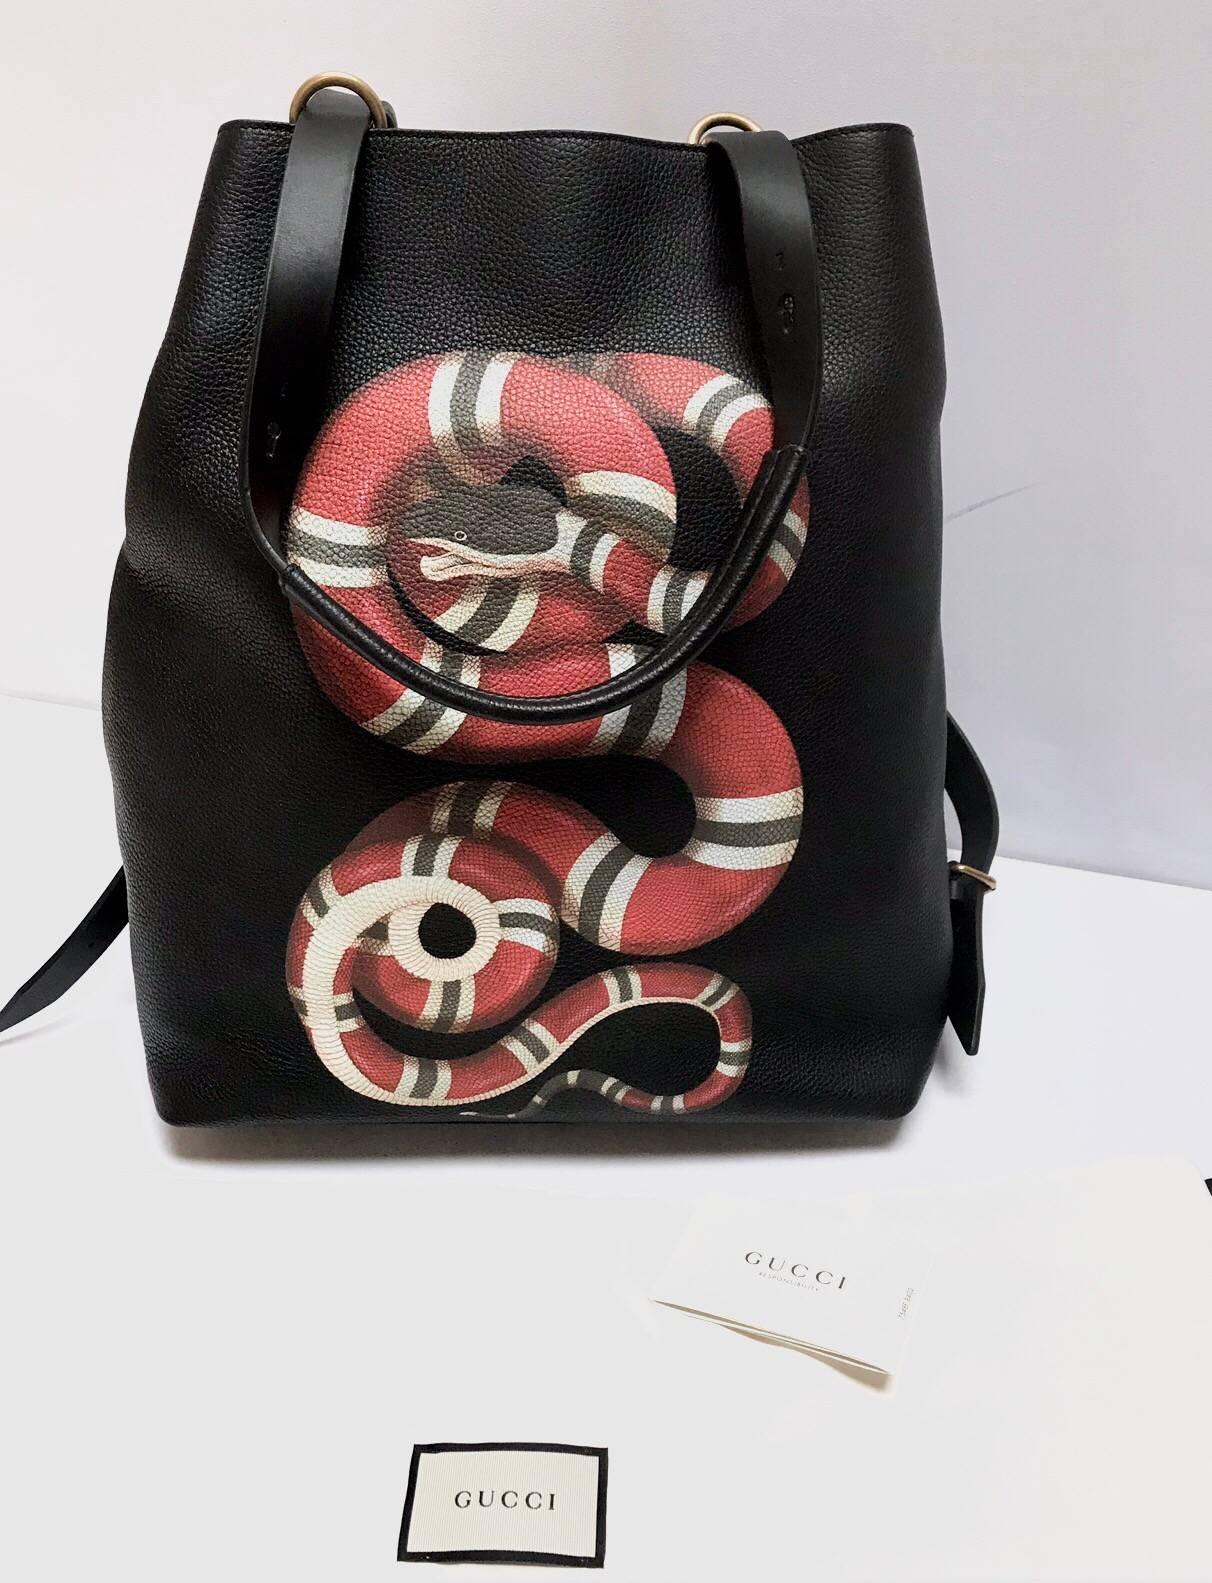 Gucci Backpack for Men's in Black Leather with Red Serpent 2017 6